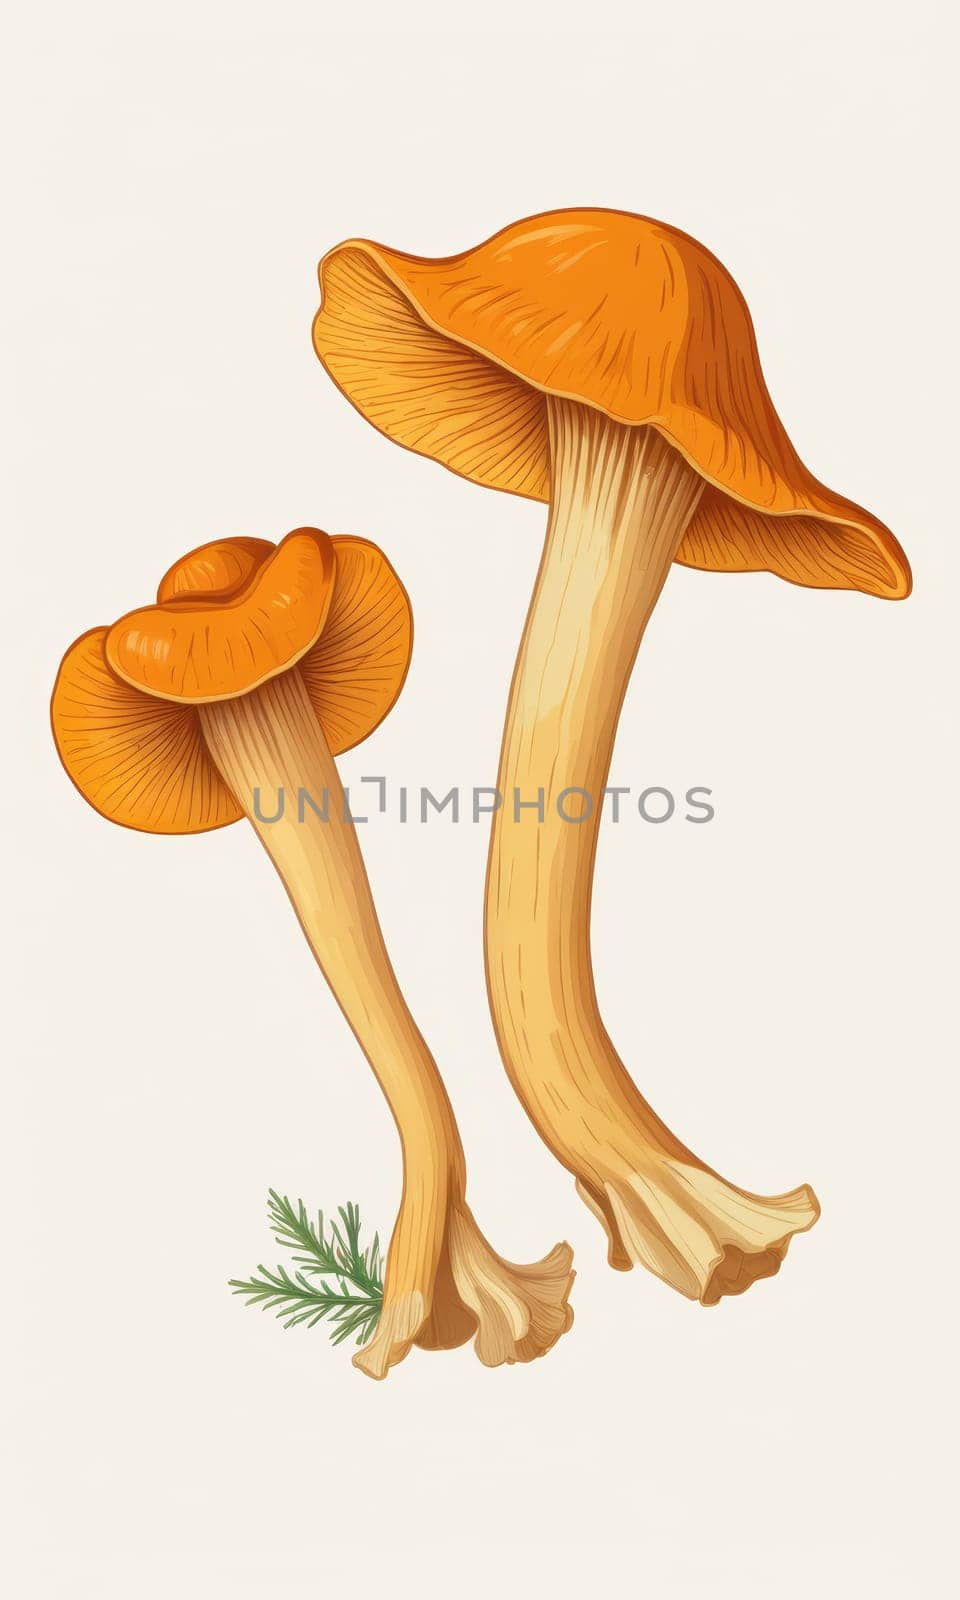 pattern with chanterelle mushrooms. illustration. by Andre1ns